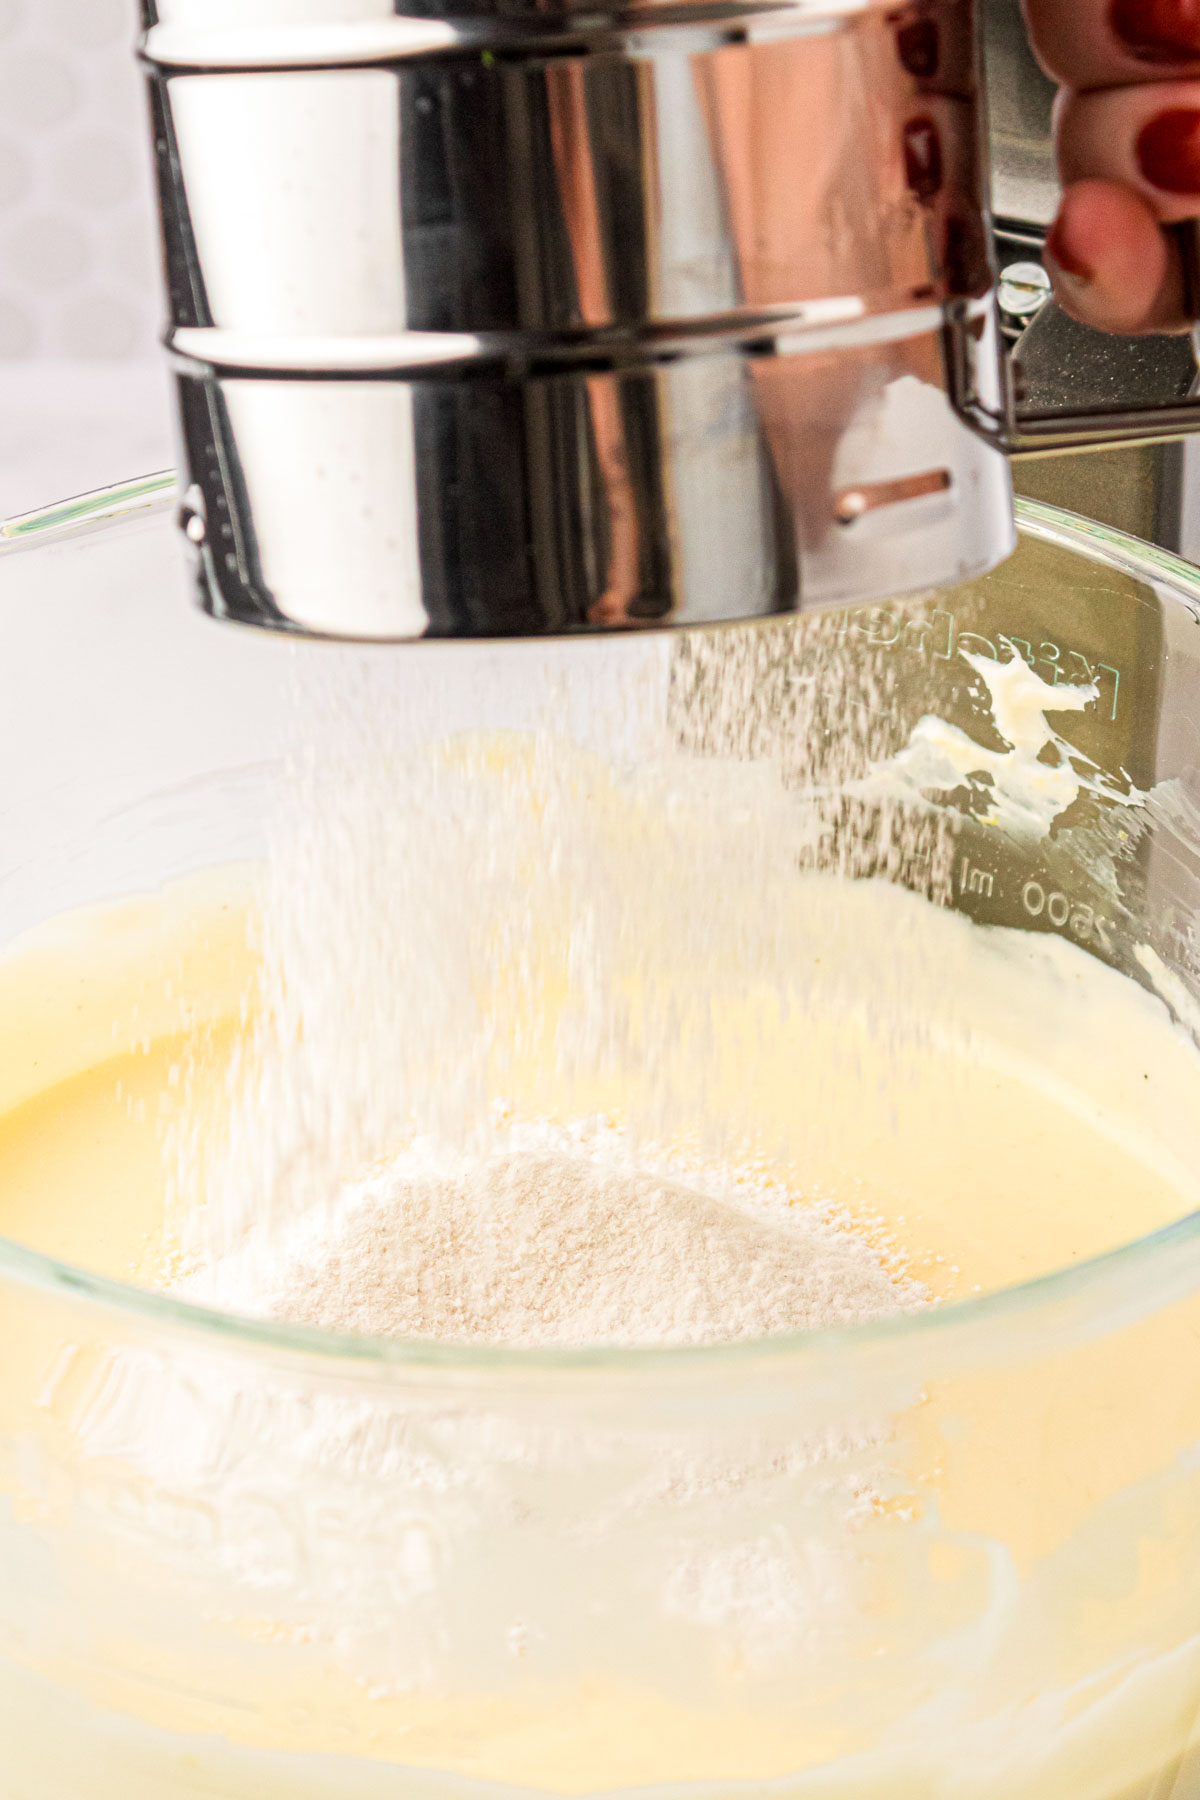 Flour being sifted into a glass mixing bowl with cheesecake filling.